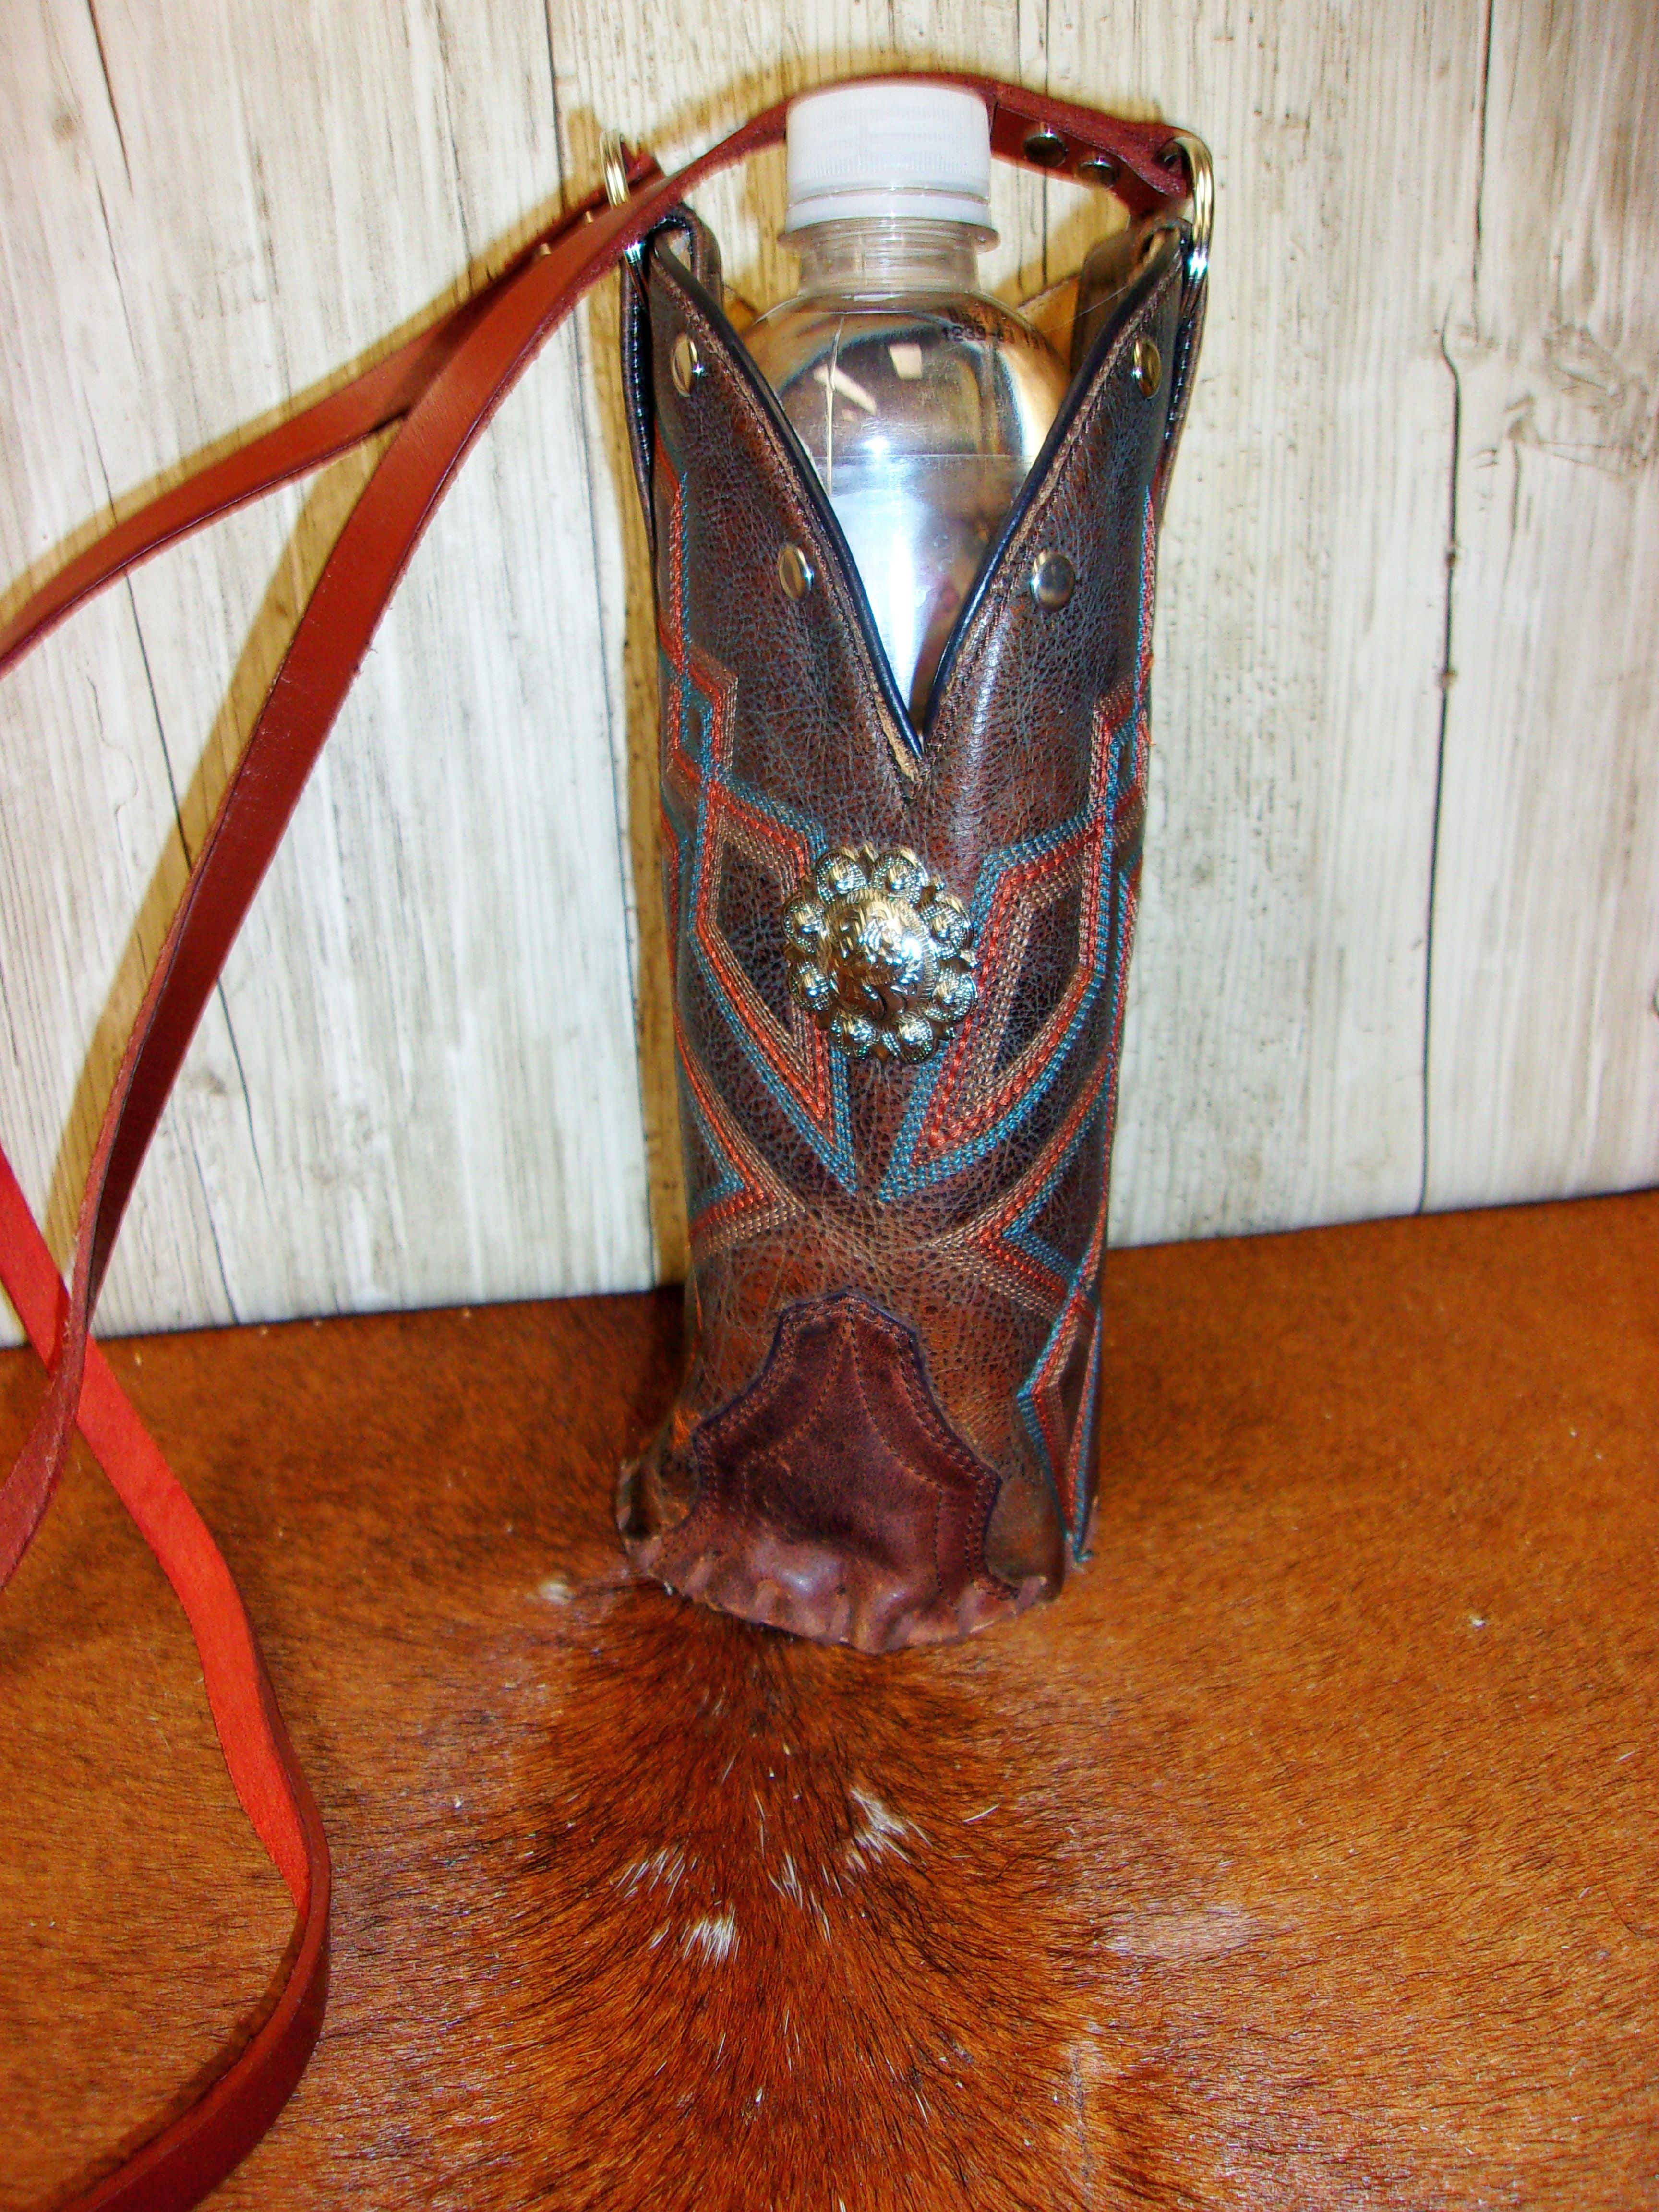 Cowboy Boot Water Bottle Tote - Bottle Caddy - Leather Bottle Holder WA39 cowboy boot purses, western fringe purse, handmade leather purses, boot purse, handmade western purse, custom leather handbags Chris Thompson Bags